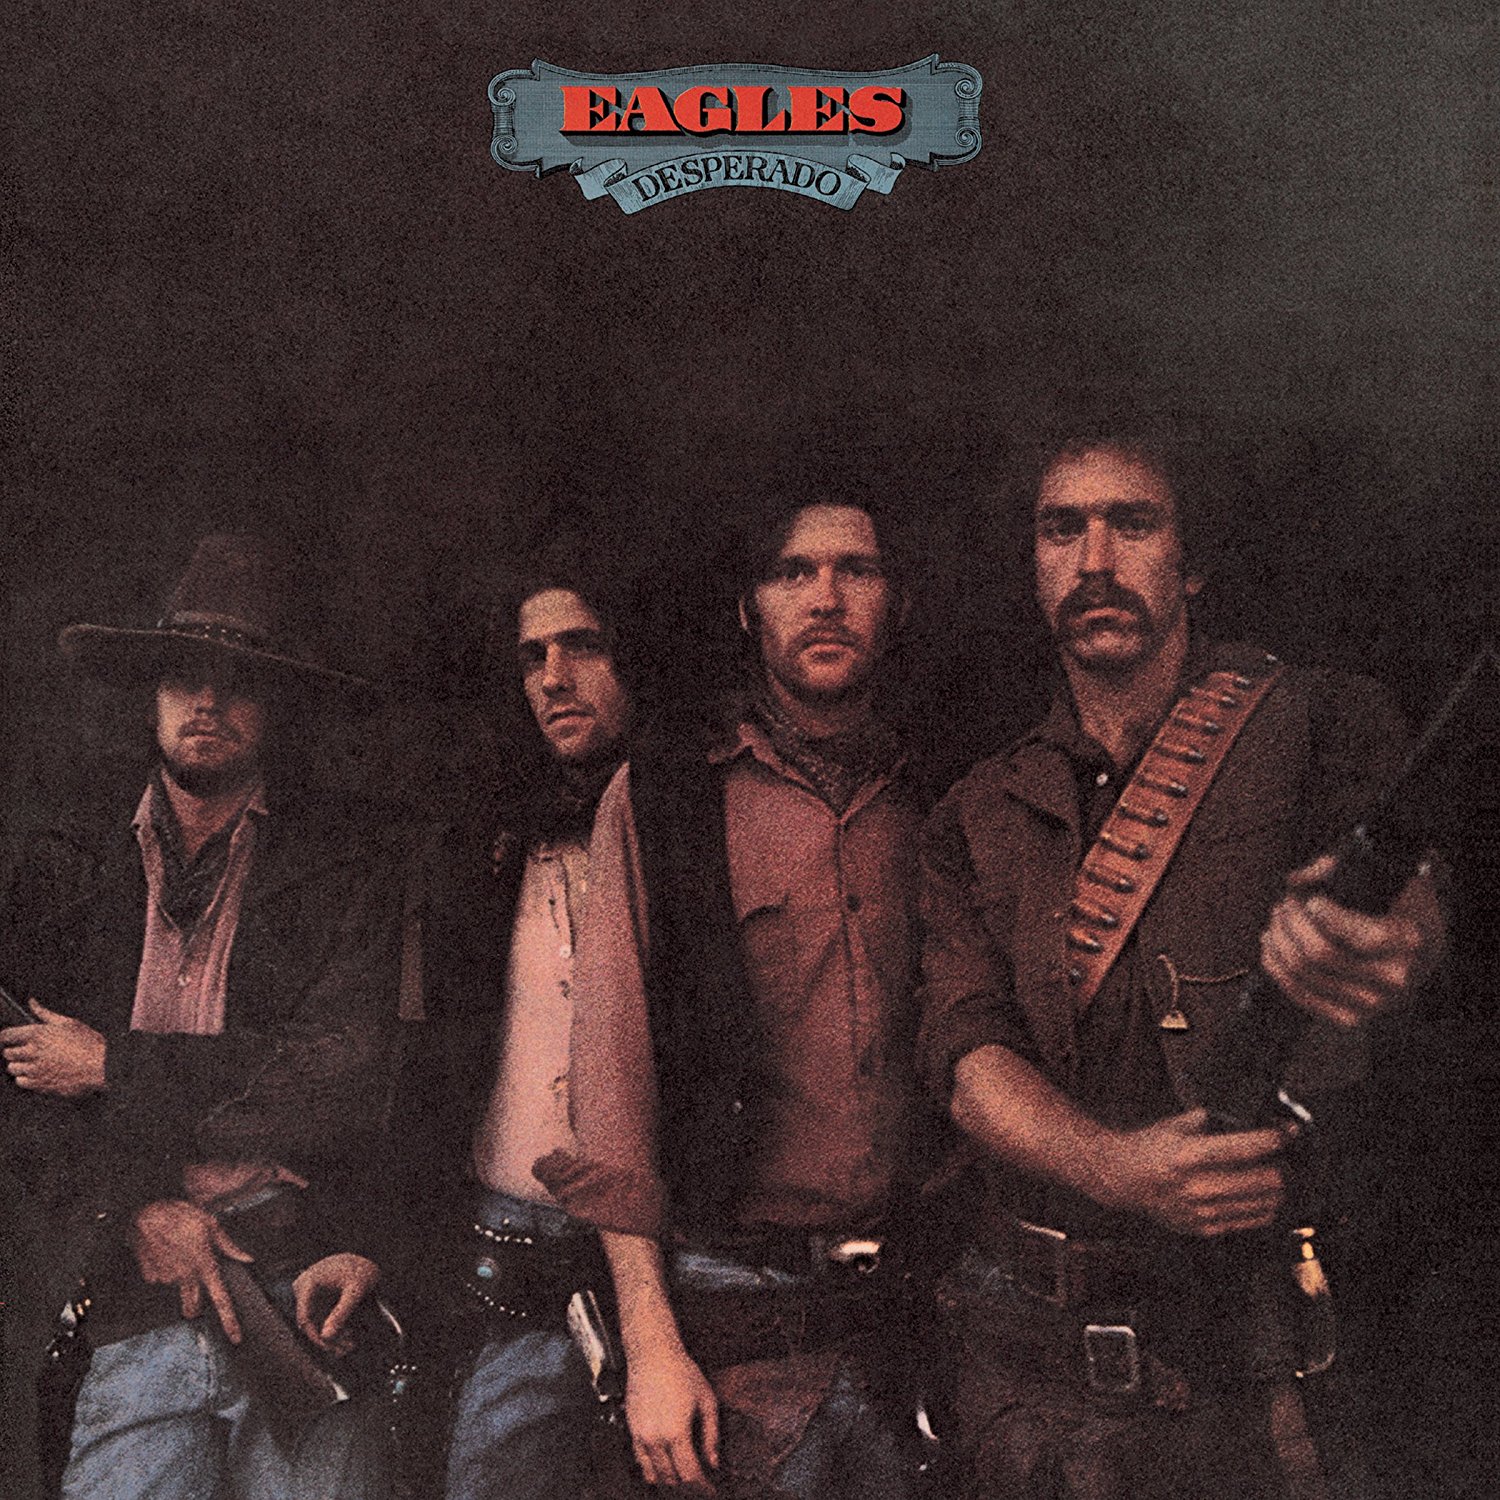 Eagles Albums: Ranked from Worst to Best